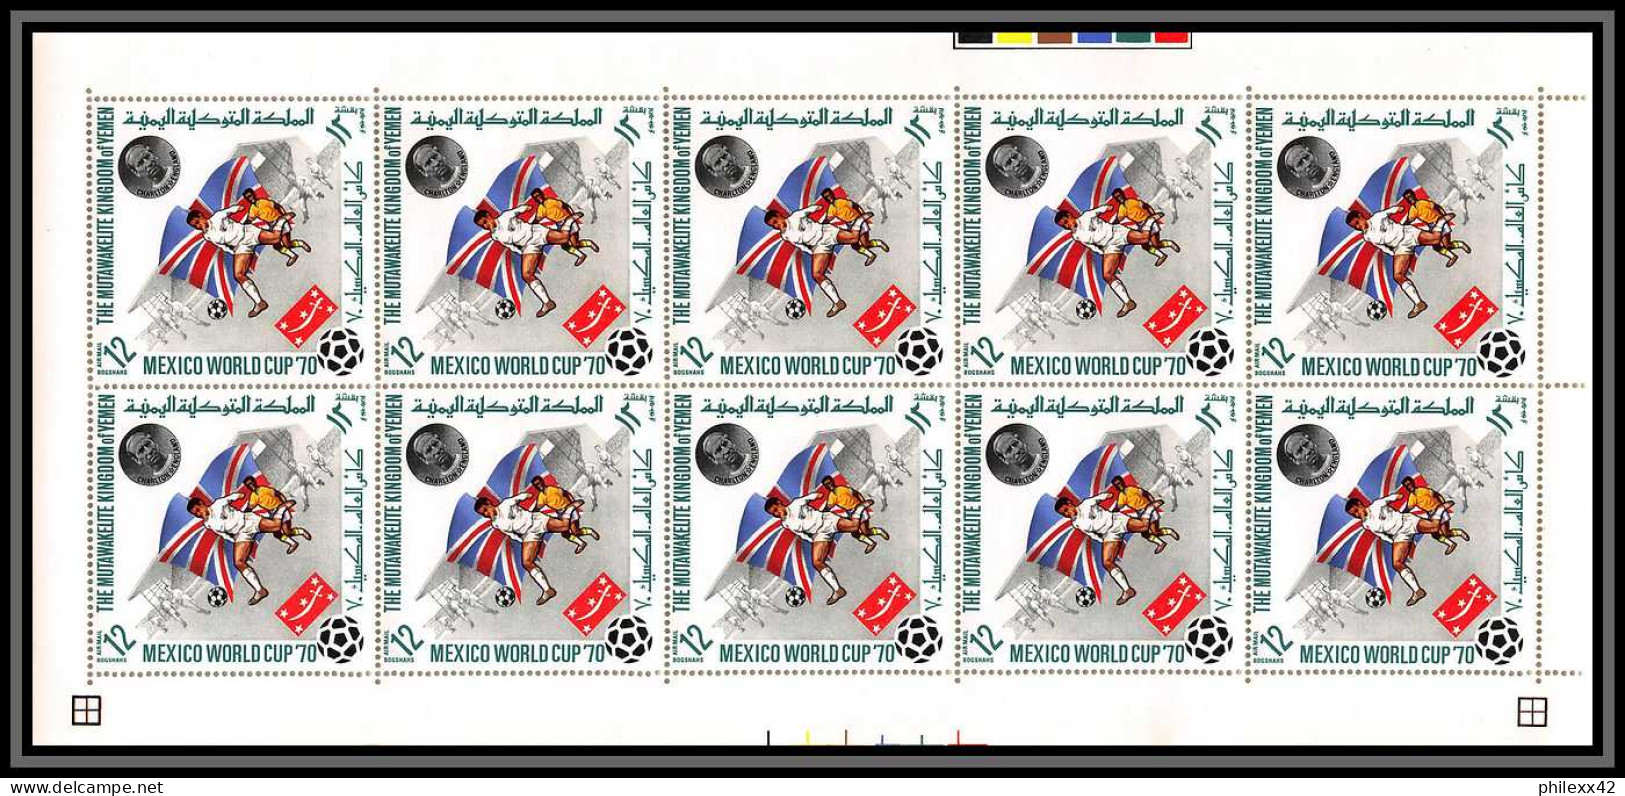 Yemen royaume (kingdom) - 4185z/ N°979/986 A  world cup mexico 1970 stadium Football soccer neuf ** MNH feuille sheets